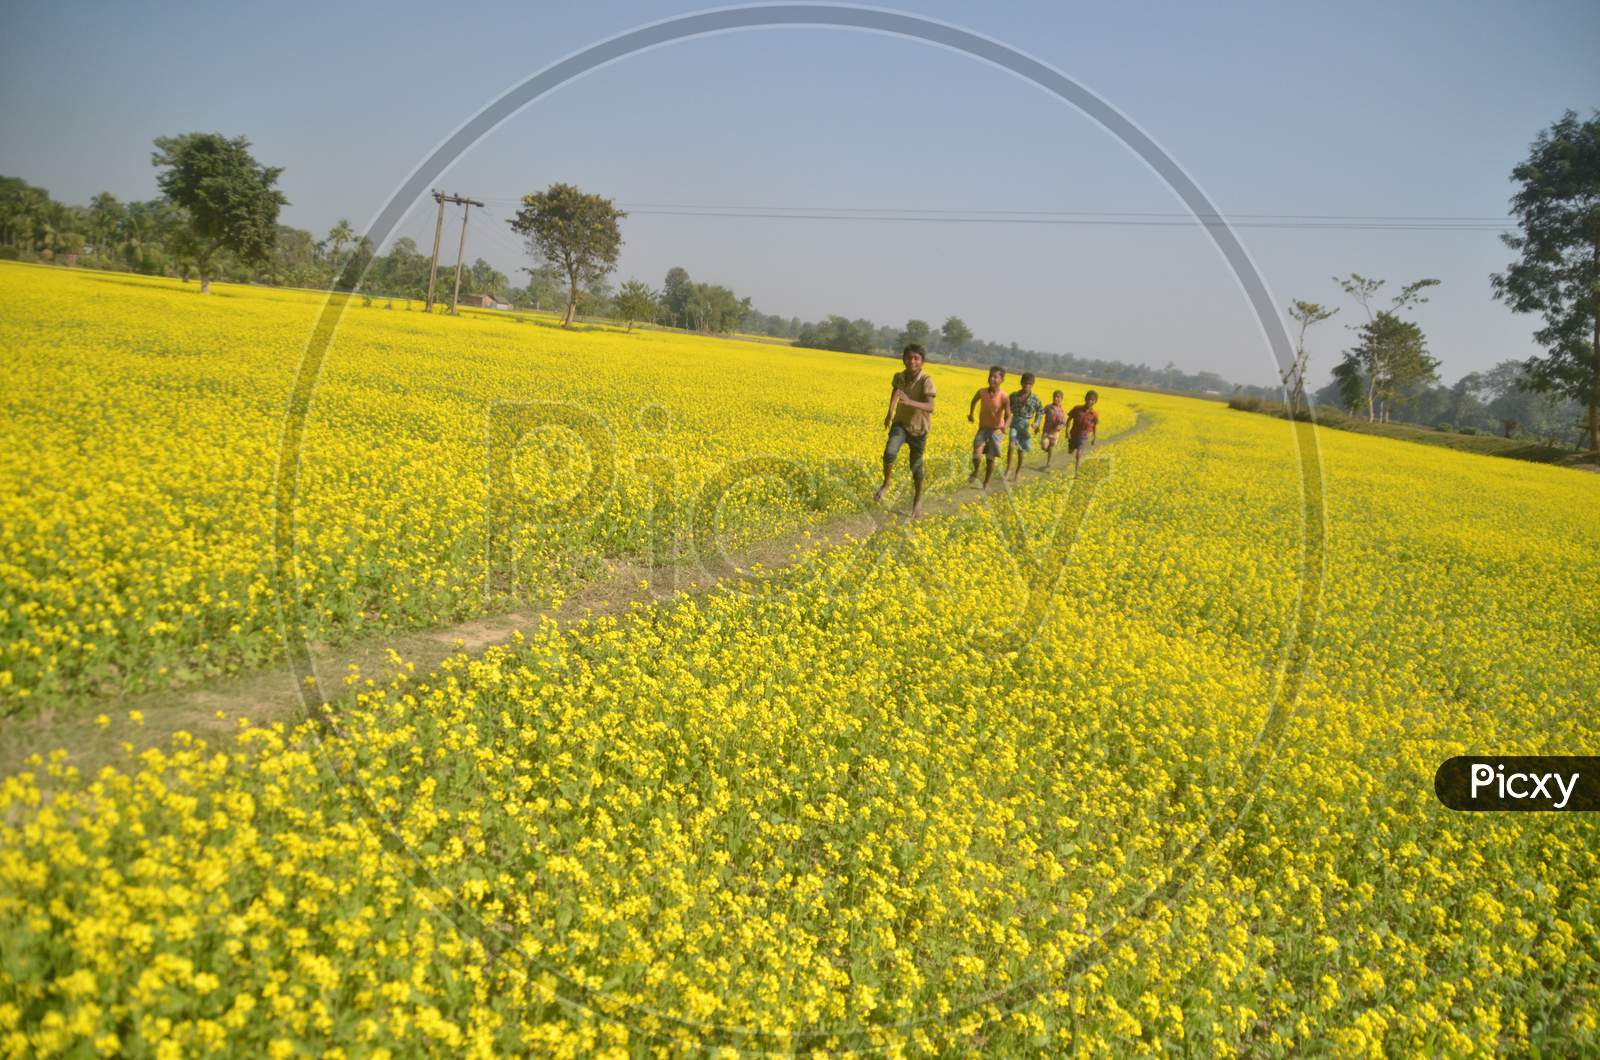 Children Playing in Mustard Fields With Yellow Blooming Flowers in Morigaon, Assam